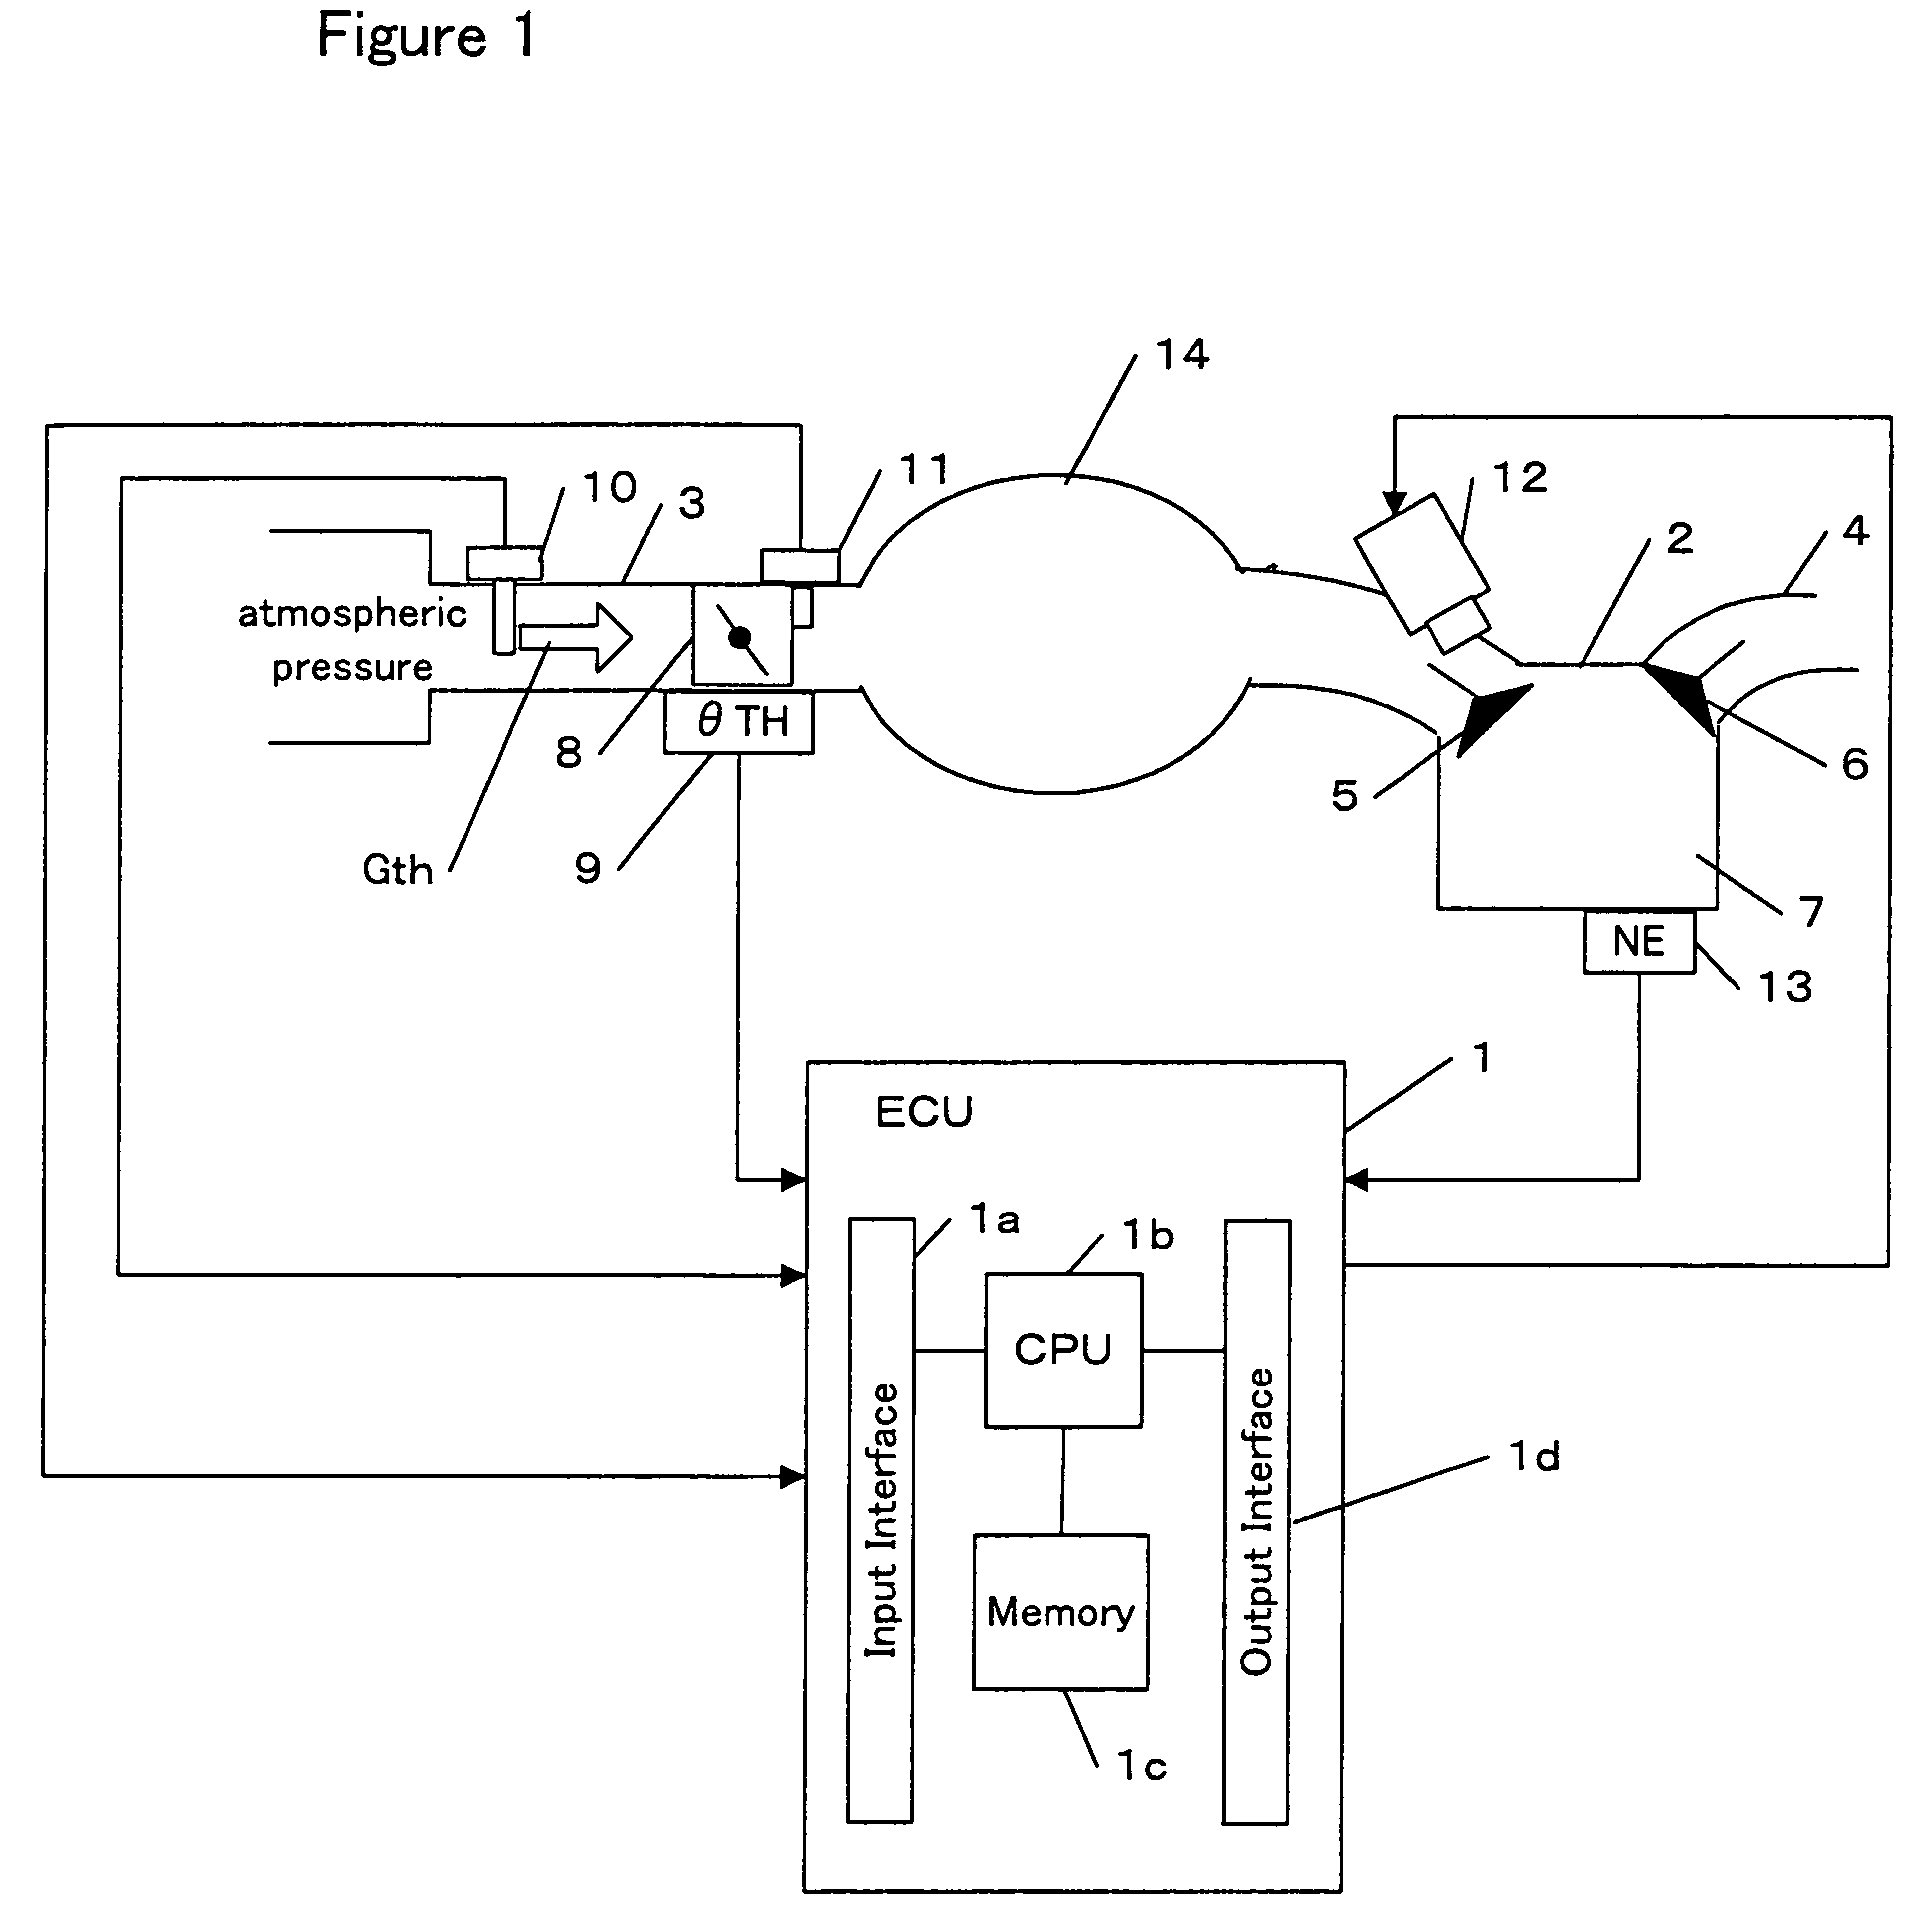 Controller for controlling a plant